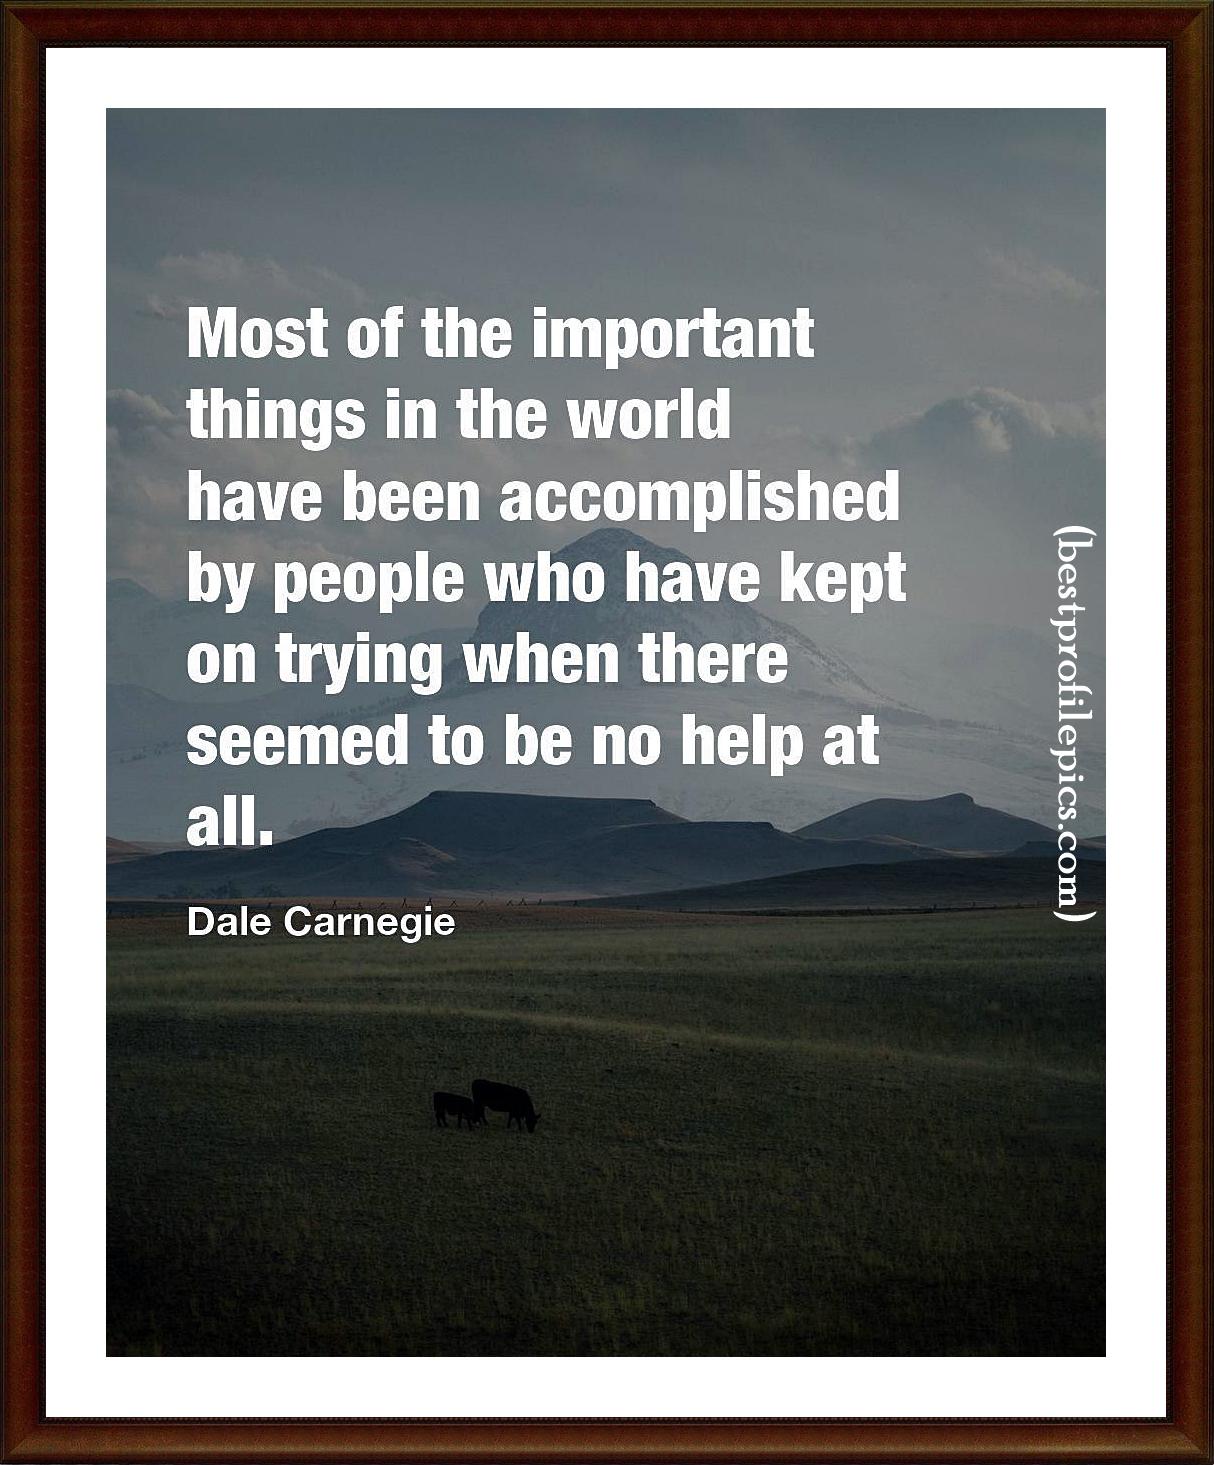 dale carnegie quotes relationships